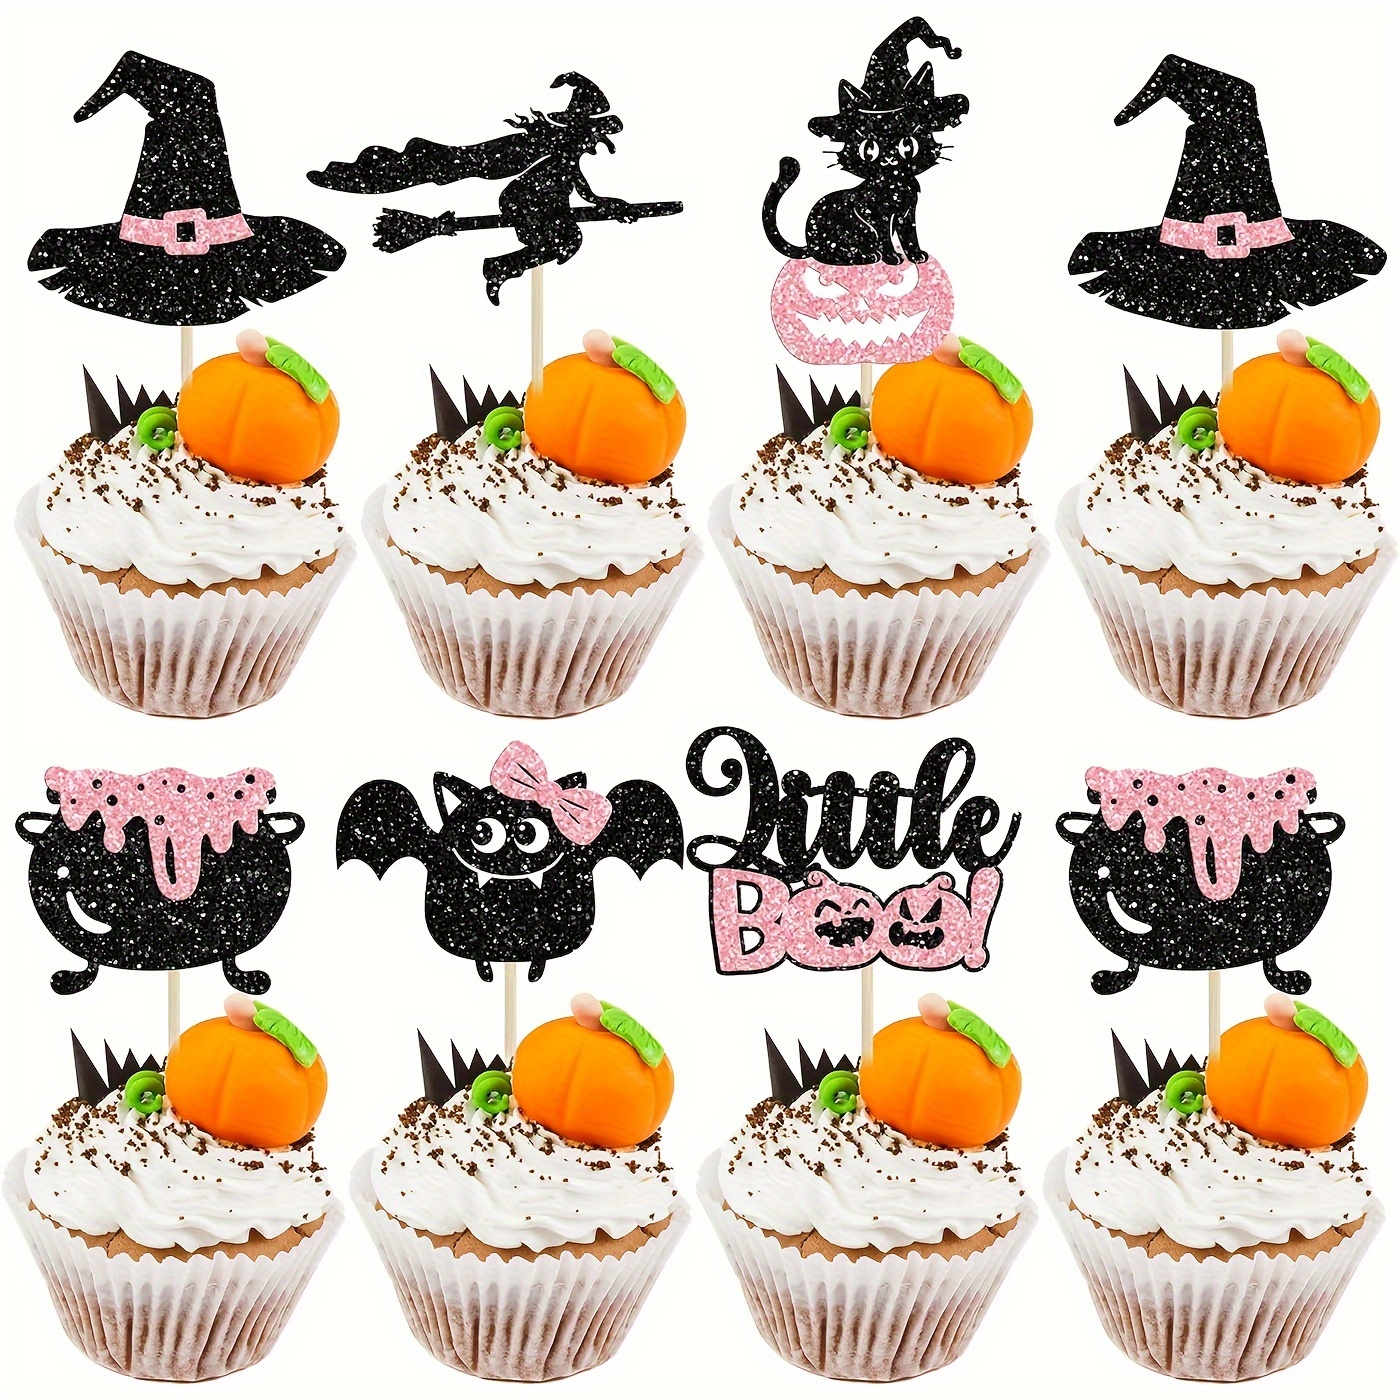 

24-pack Halloween Cupcake Toppers, Sparkling Pink Ghost, Shh Bat, Witch Hat, Cat & , Paper Cake Decorations For Baby Shower, Birthday Party, Halloween Themed Events - Non-electric Cake Supplies